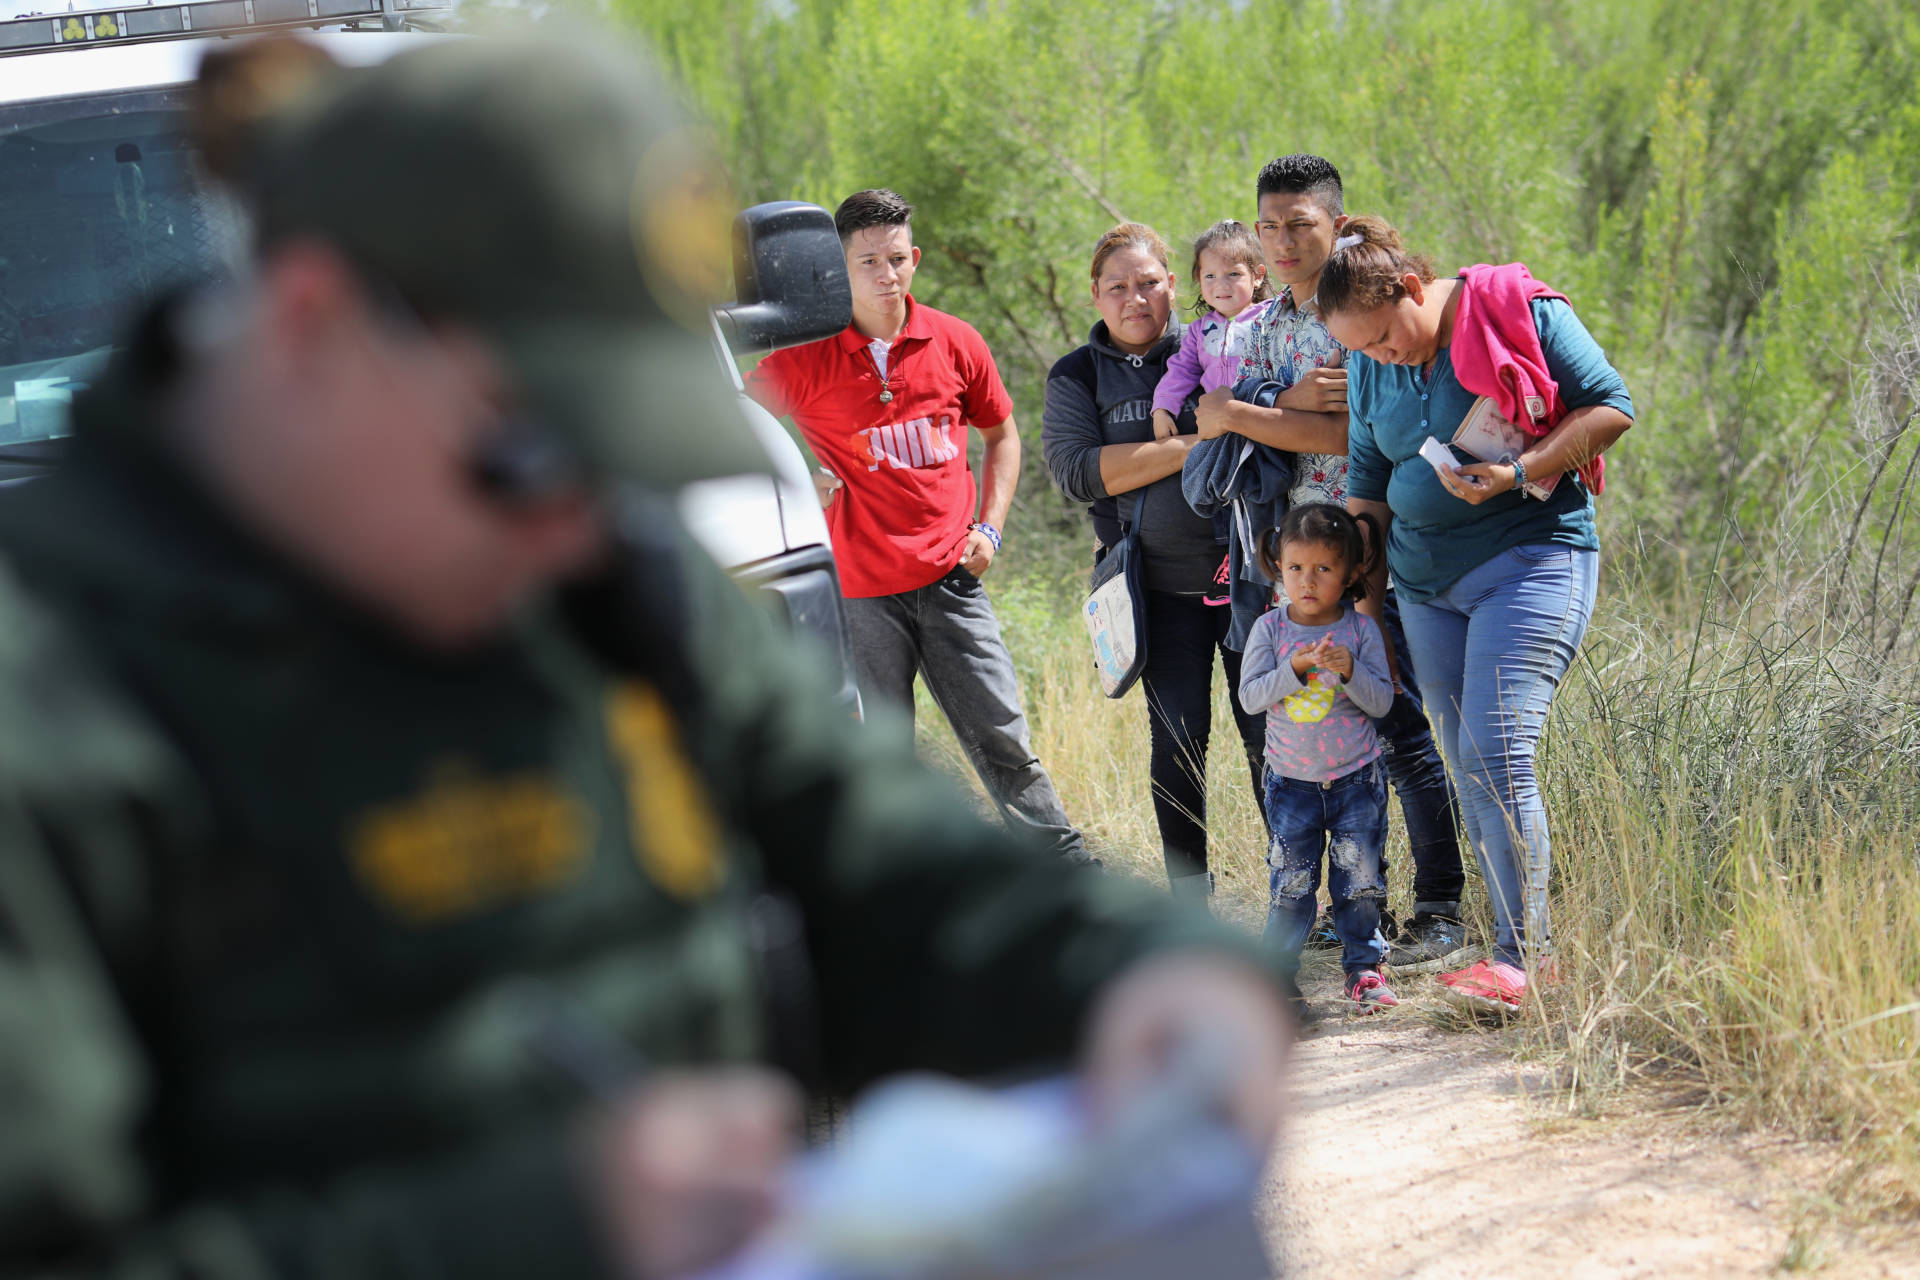 Central American asylum-seekers wait as U.S. Border Patrol agents take groups of them into custody on June 12, 2018, near McAllen, Texas. The families were then sent to a U.S. Customs and Border Protection processing center for possible separation.  John Moore/Getty Images